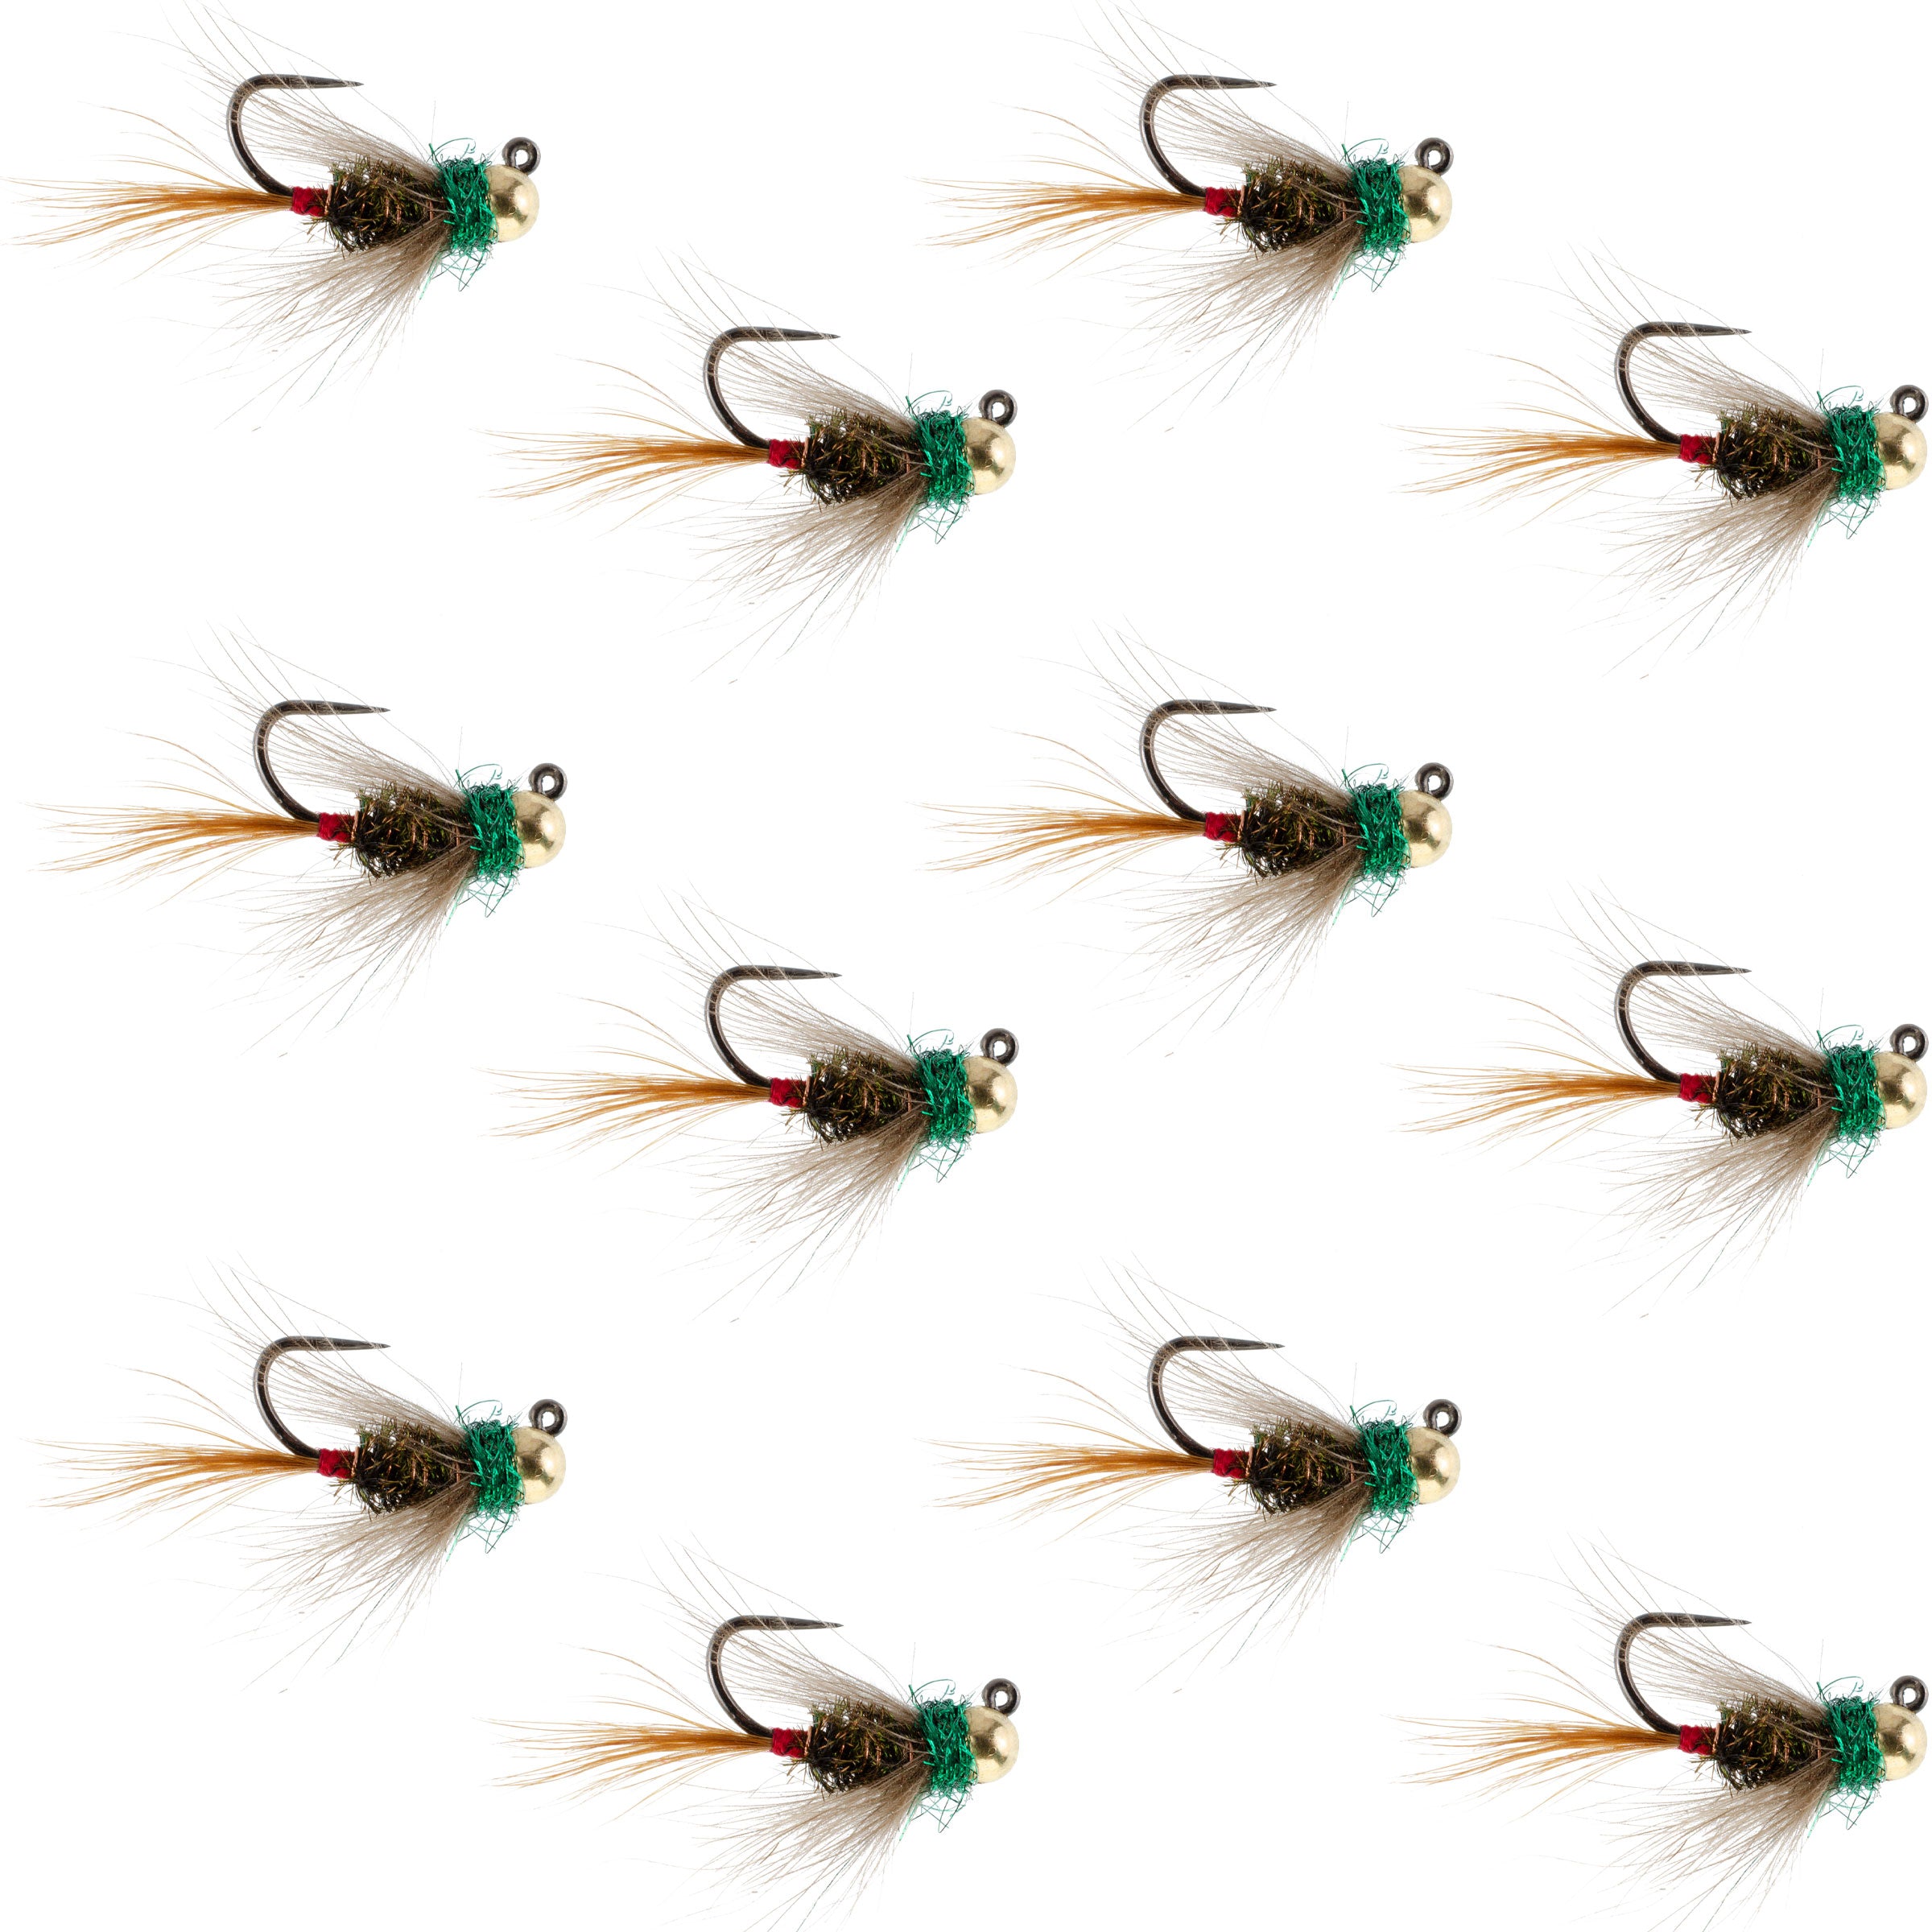 Tungsten Bead Tactical CDC Frenchie Czech Nymph Euro Nymphing Fly - 1 docena de moscas tamaño 12 